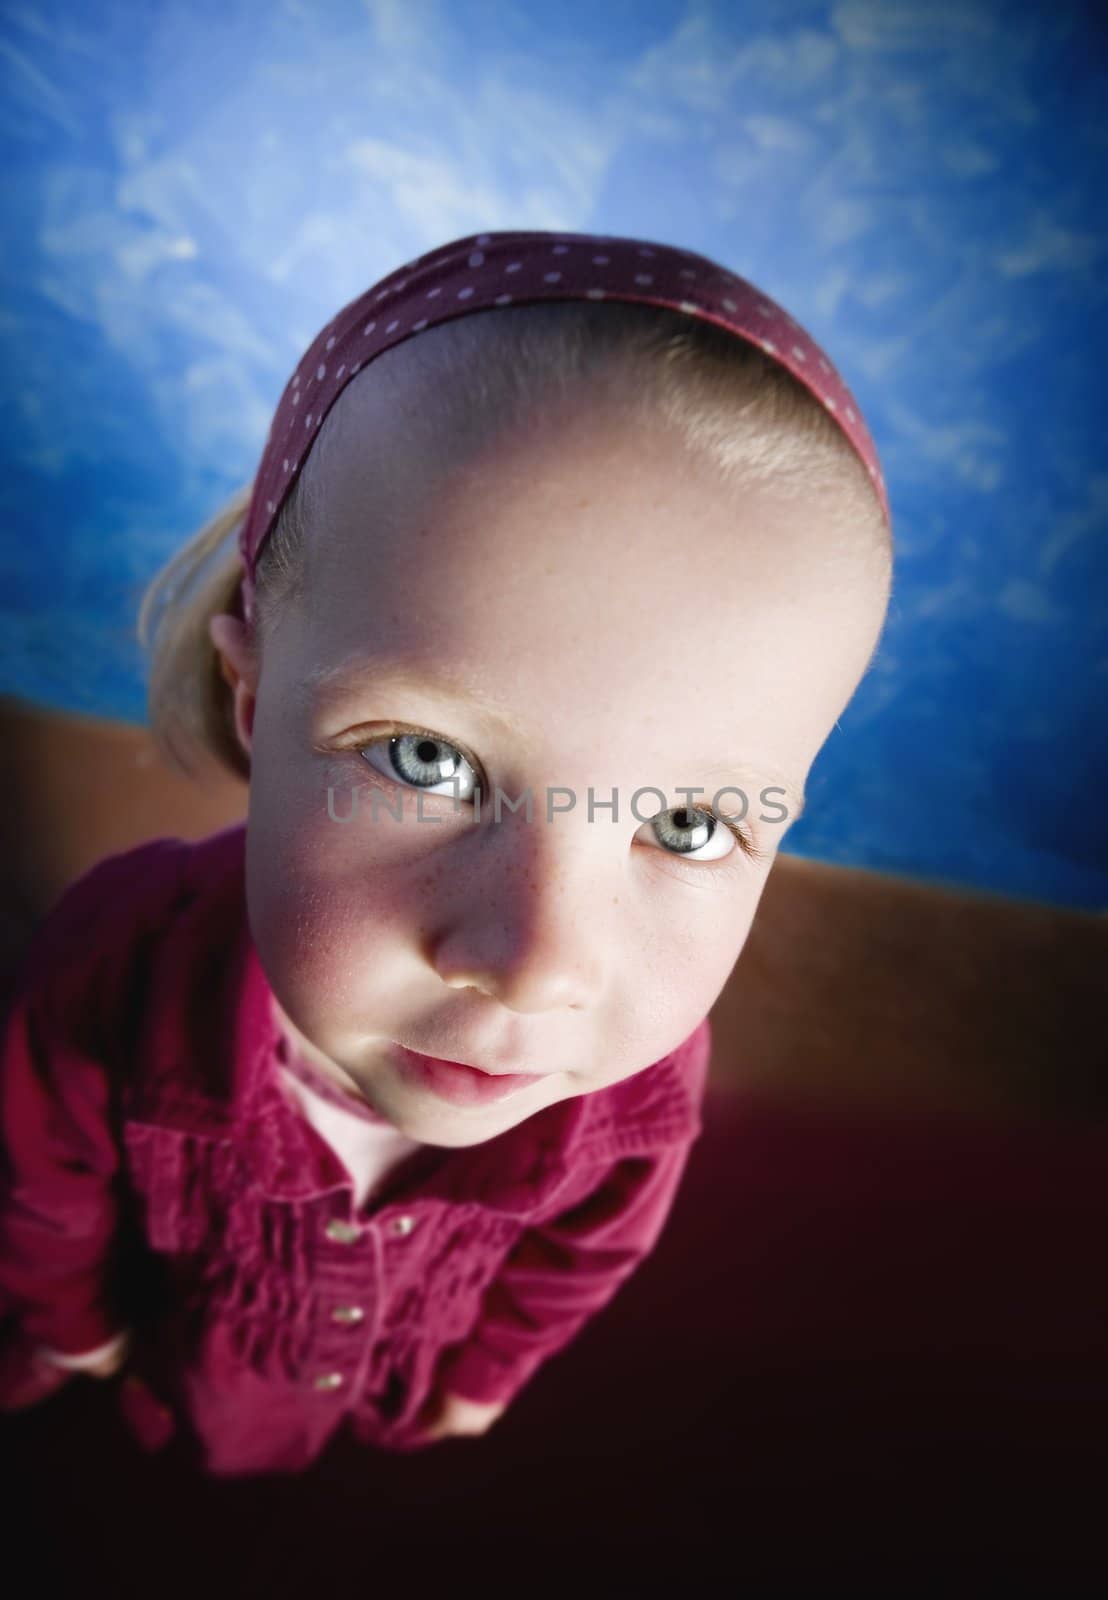 Little girl's face distorted in a wide angle lens shot